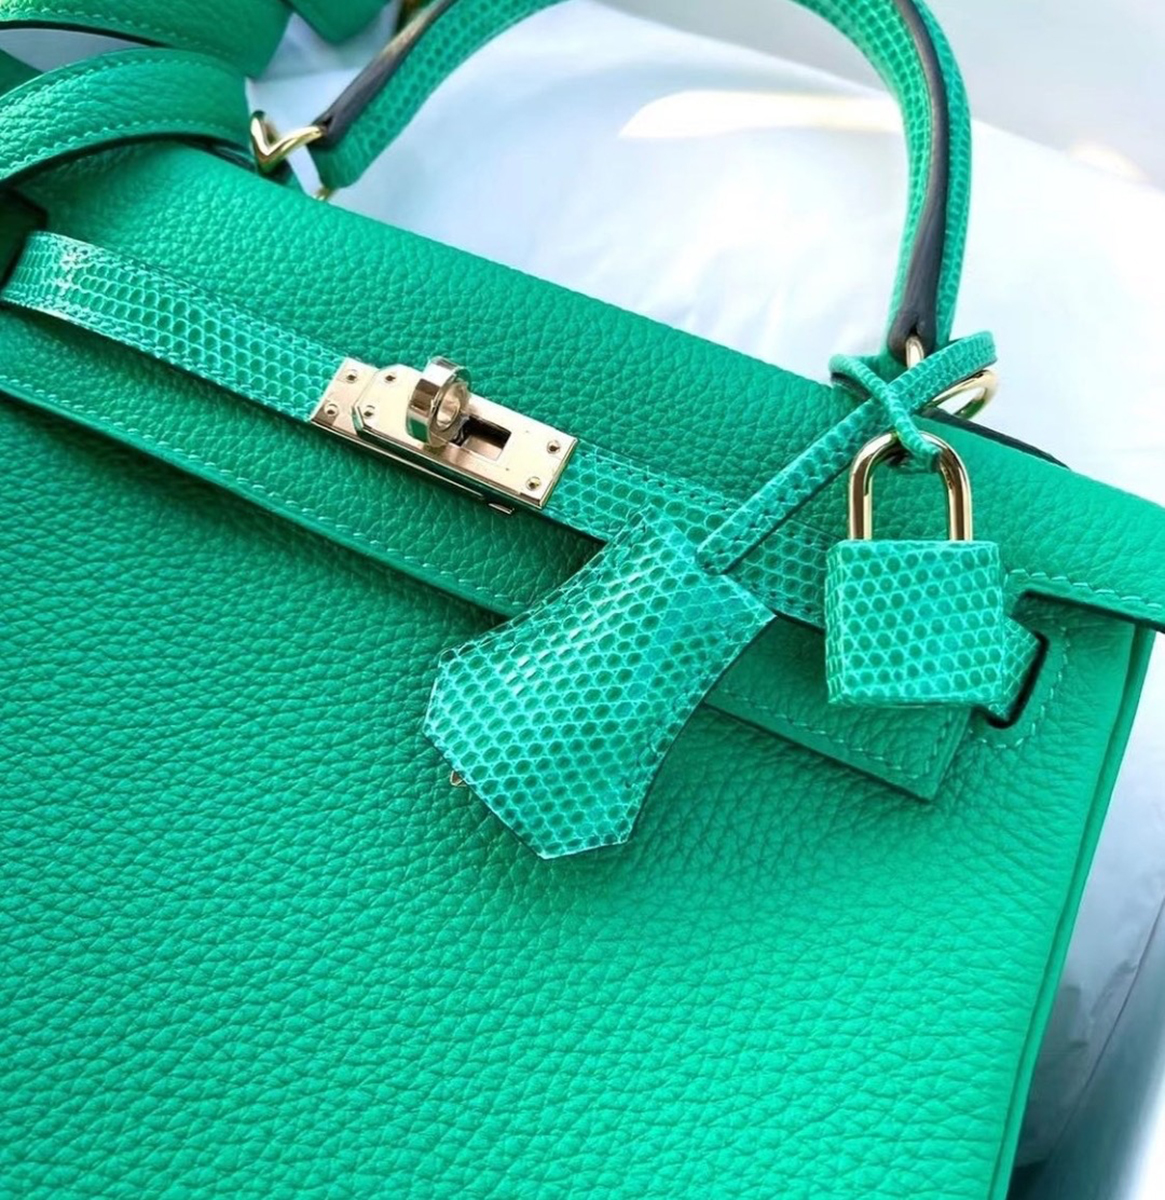 Hermès “Touch” Bags: Where Leather Meets a Splash of Exotics